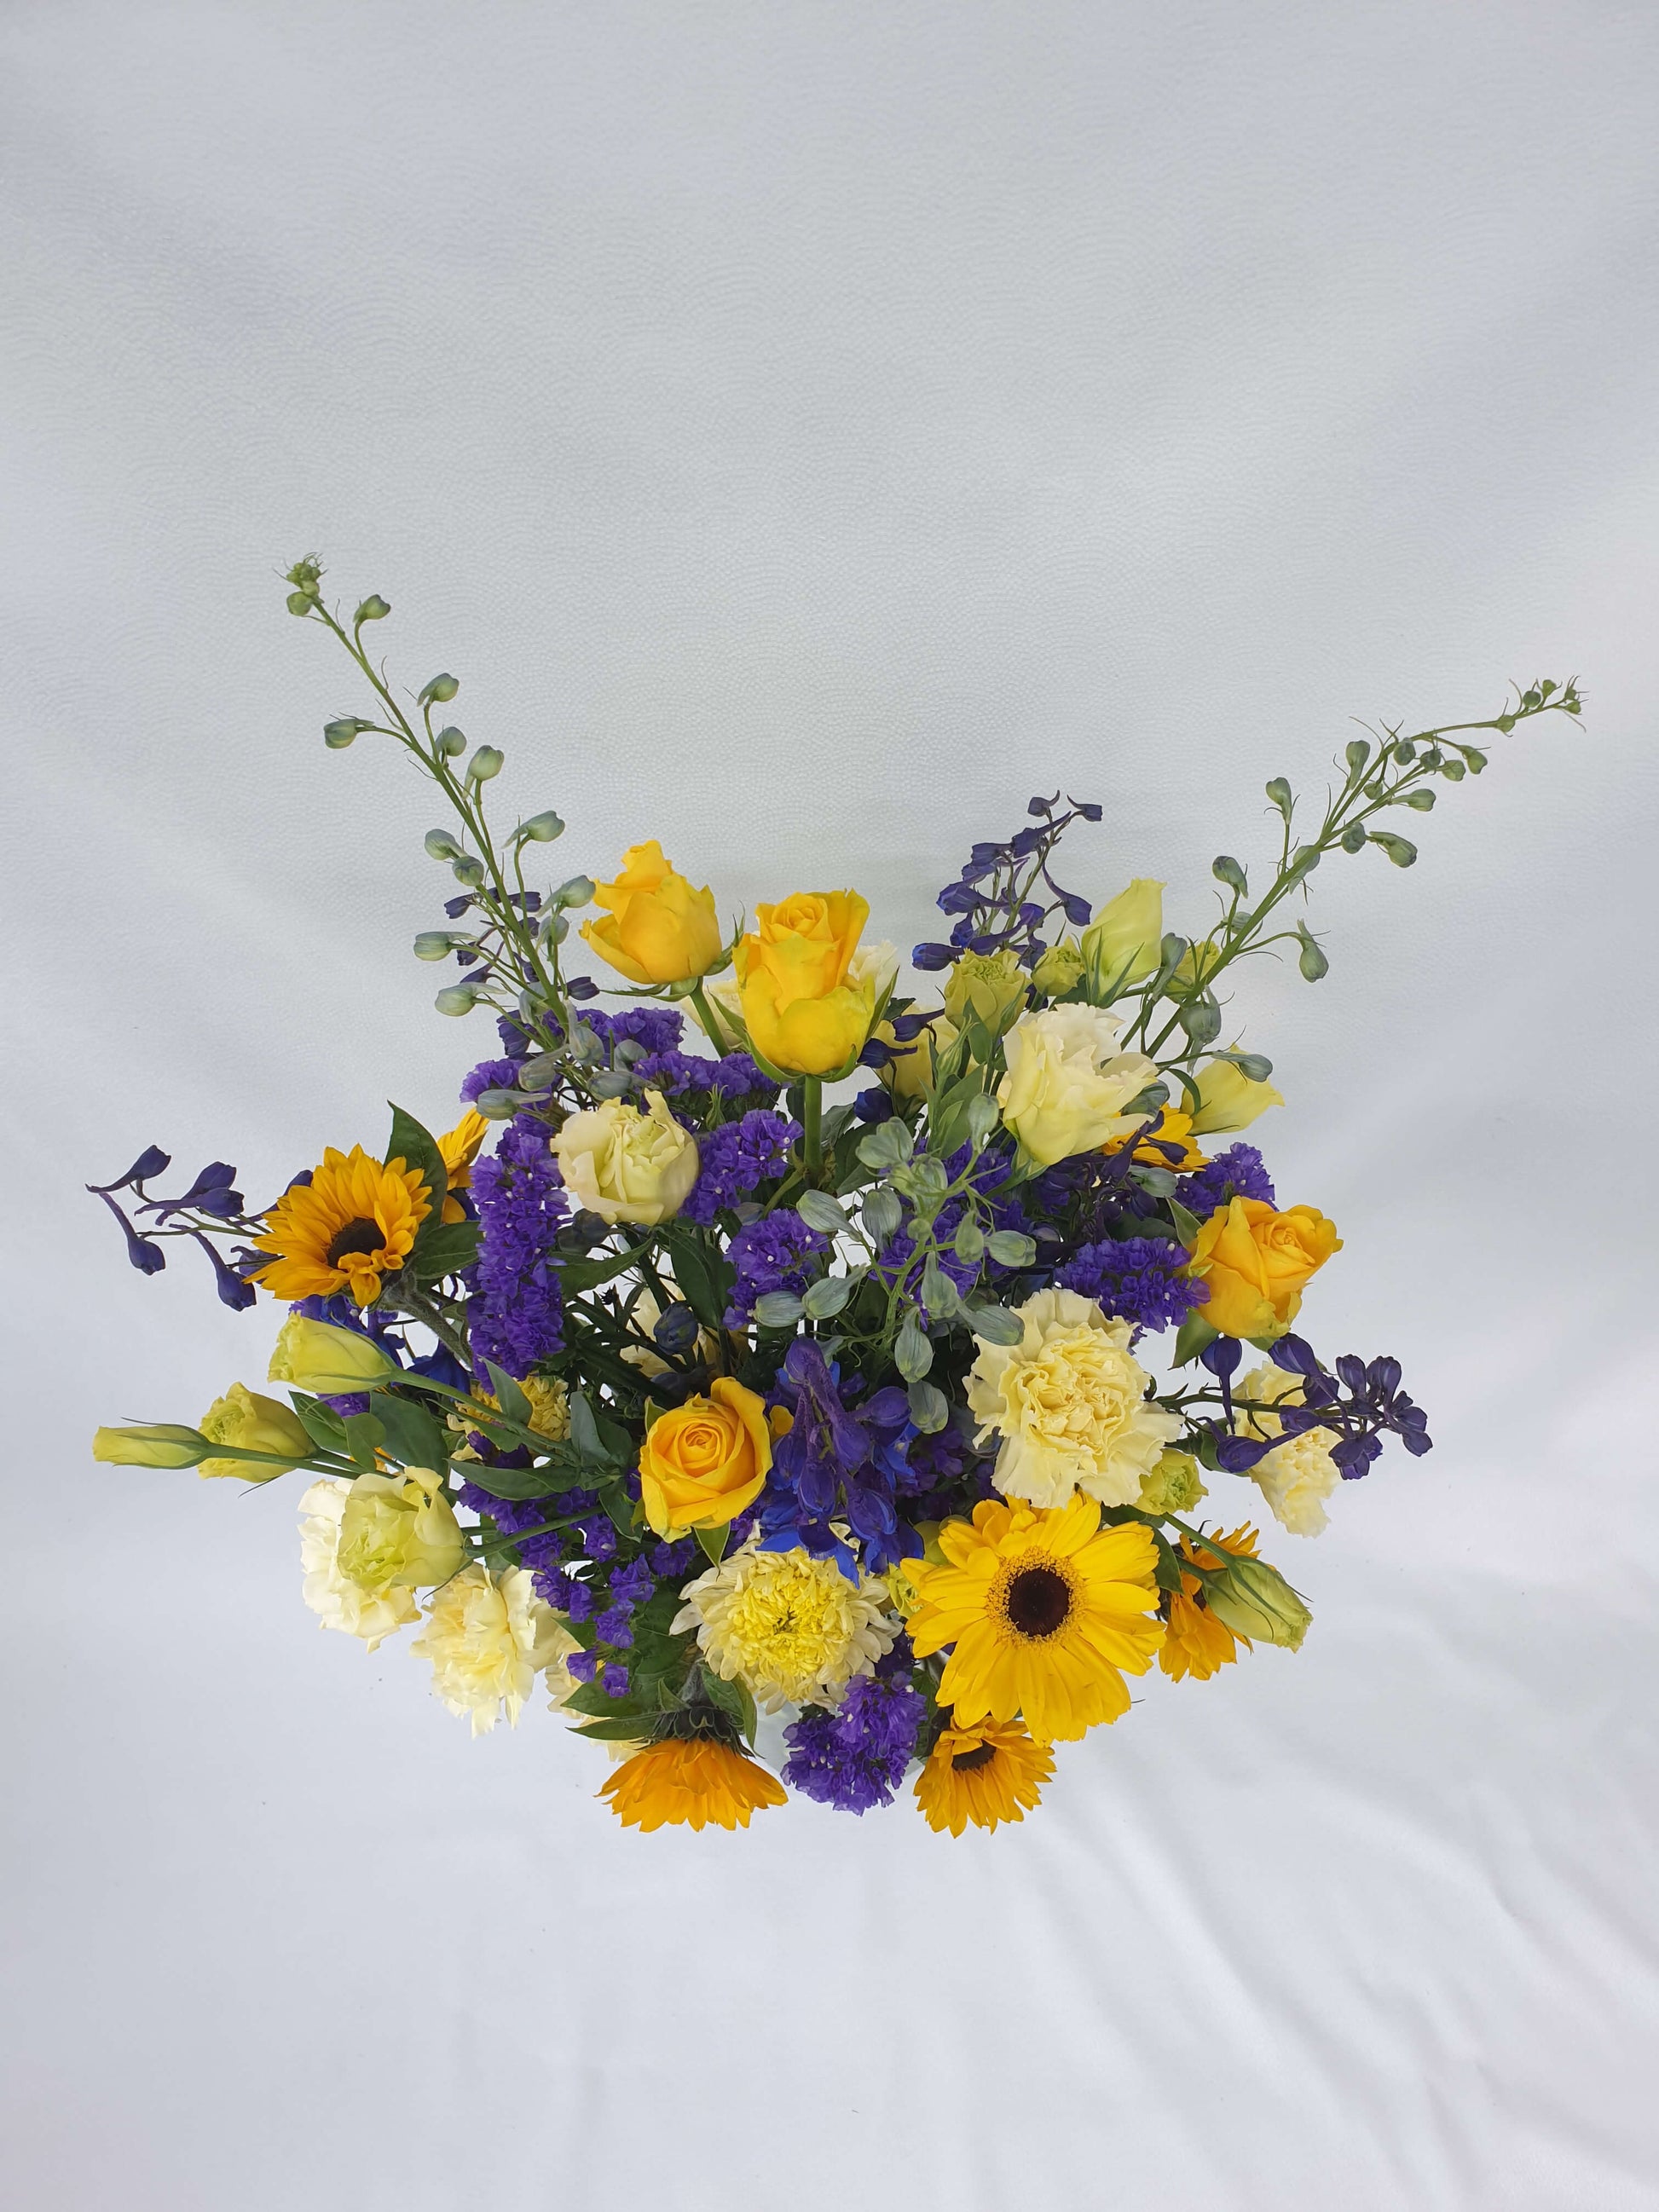 A blue and yellow bouquet from above.